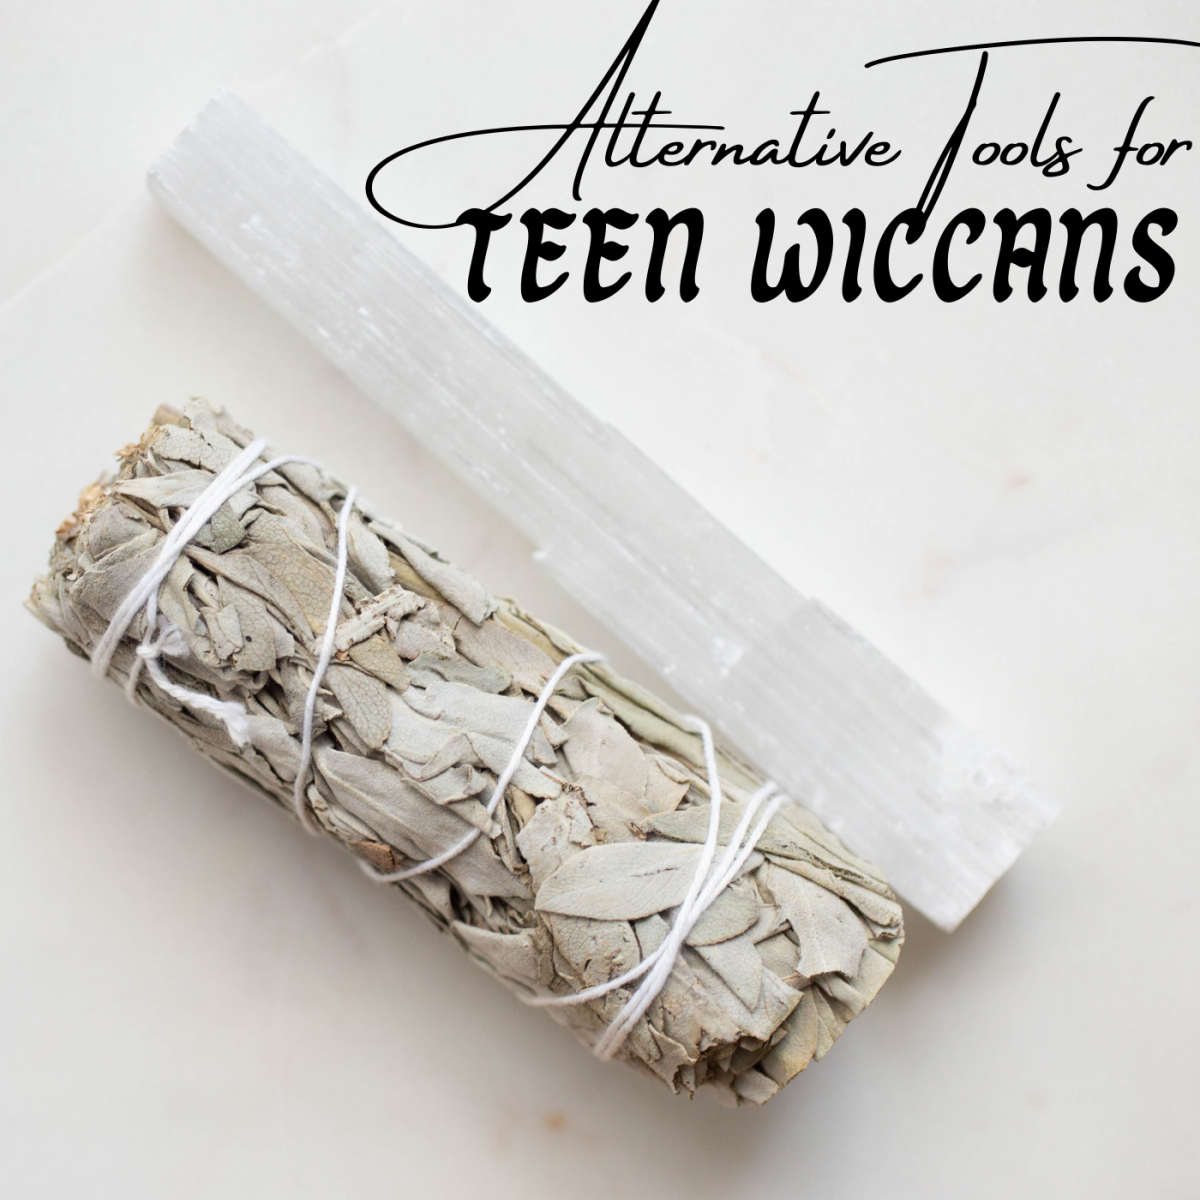 Alternative Tools for Teen Wiccans